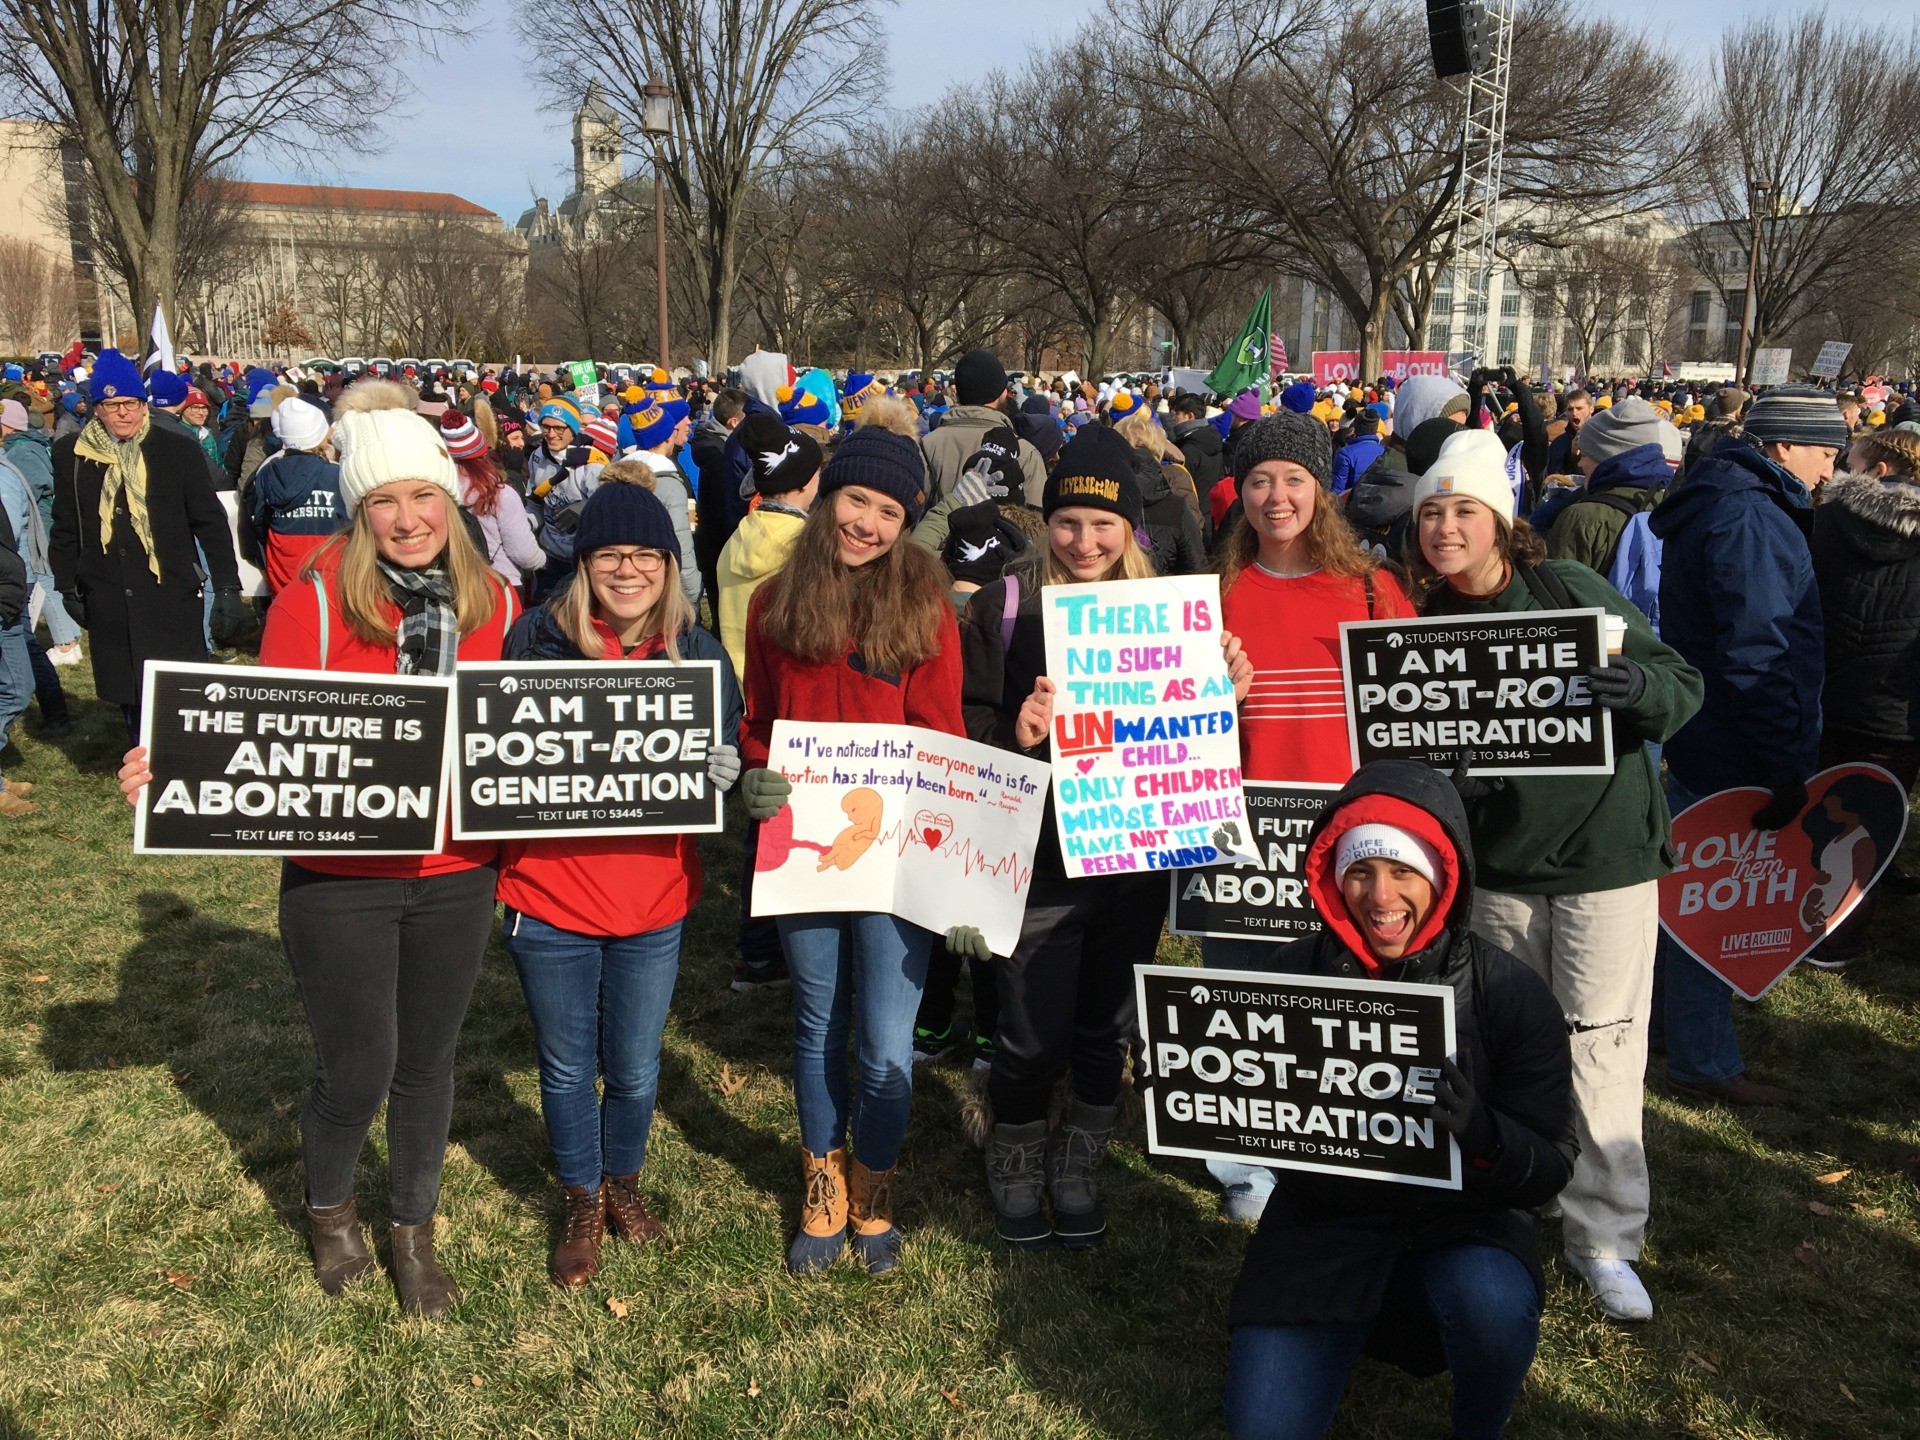 March for Life 2022, National Mall, Washington, DC. (Breitbart News / Breccan F. Thies)